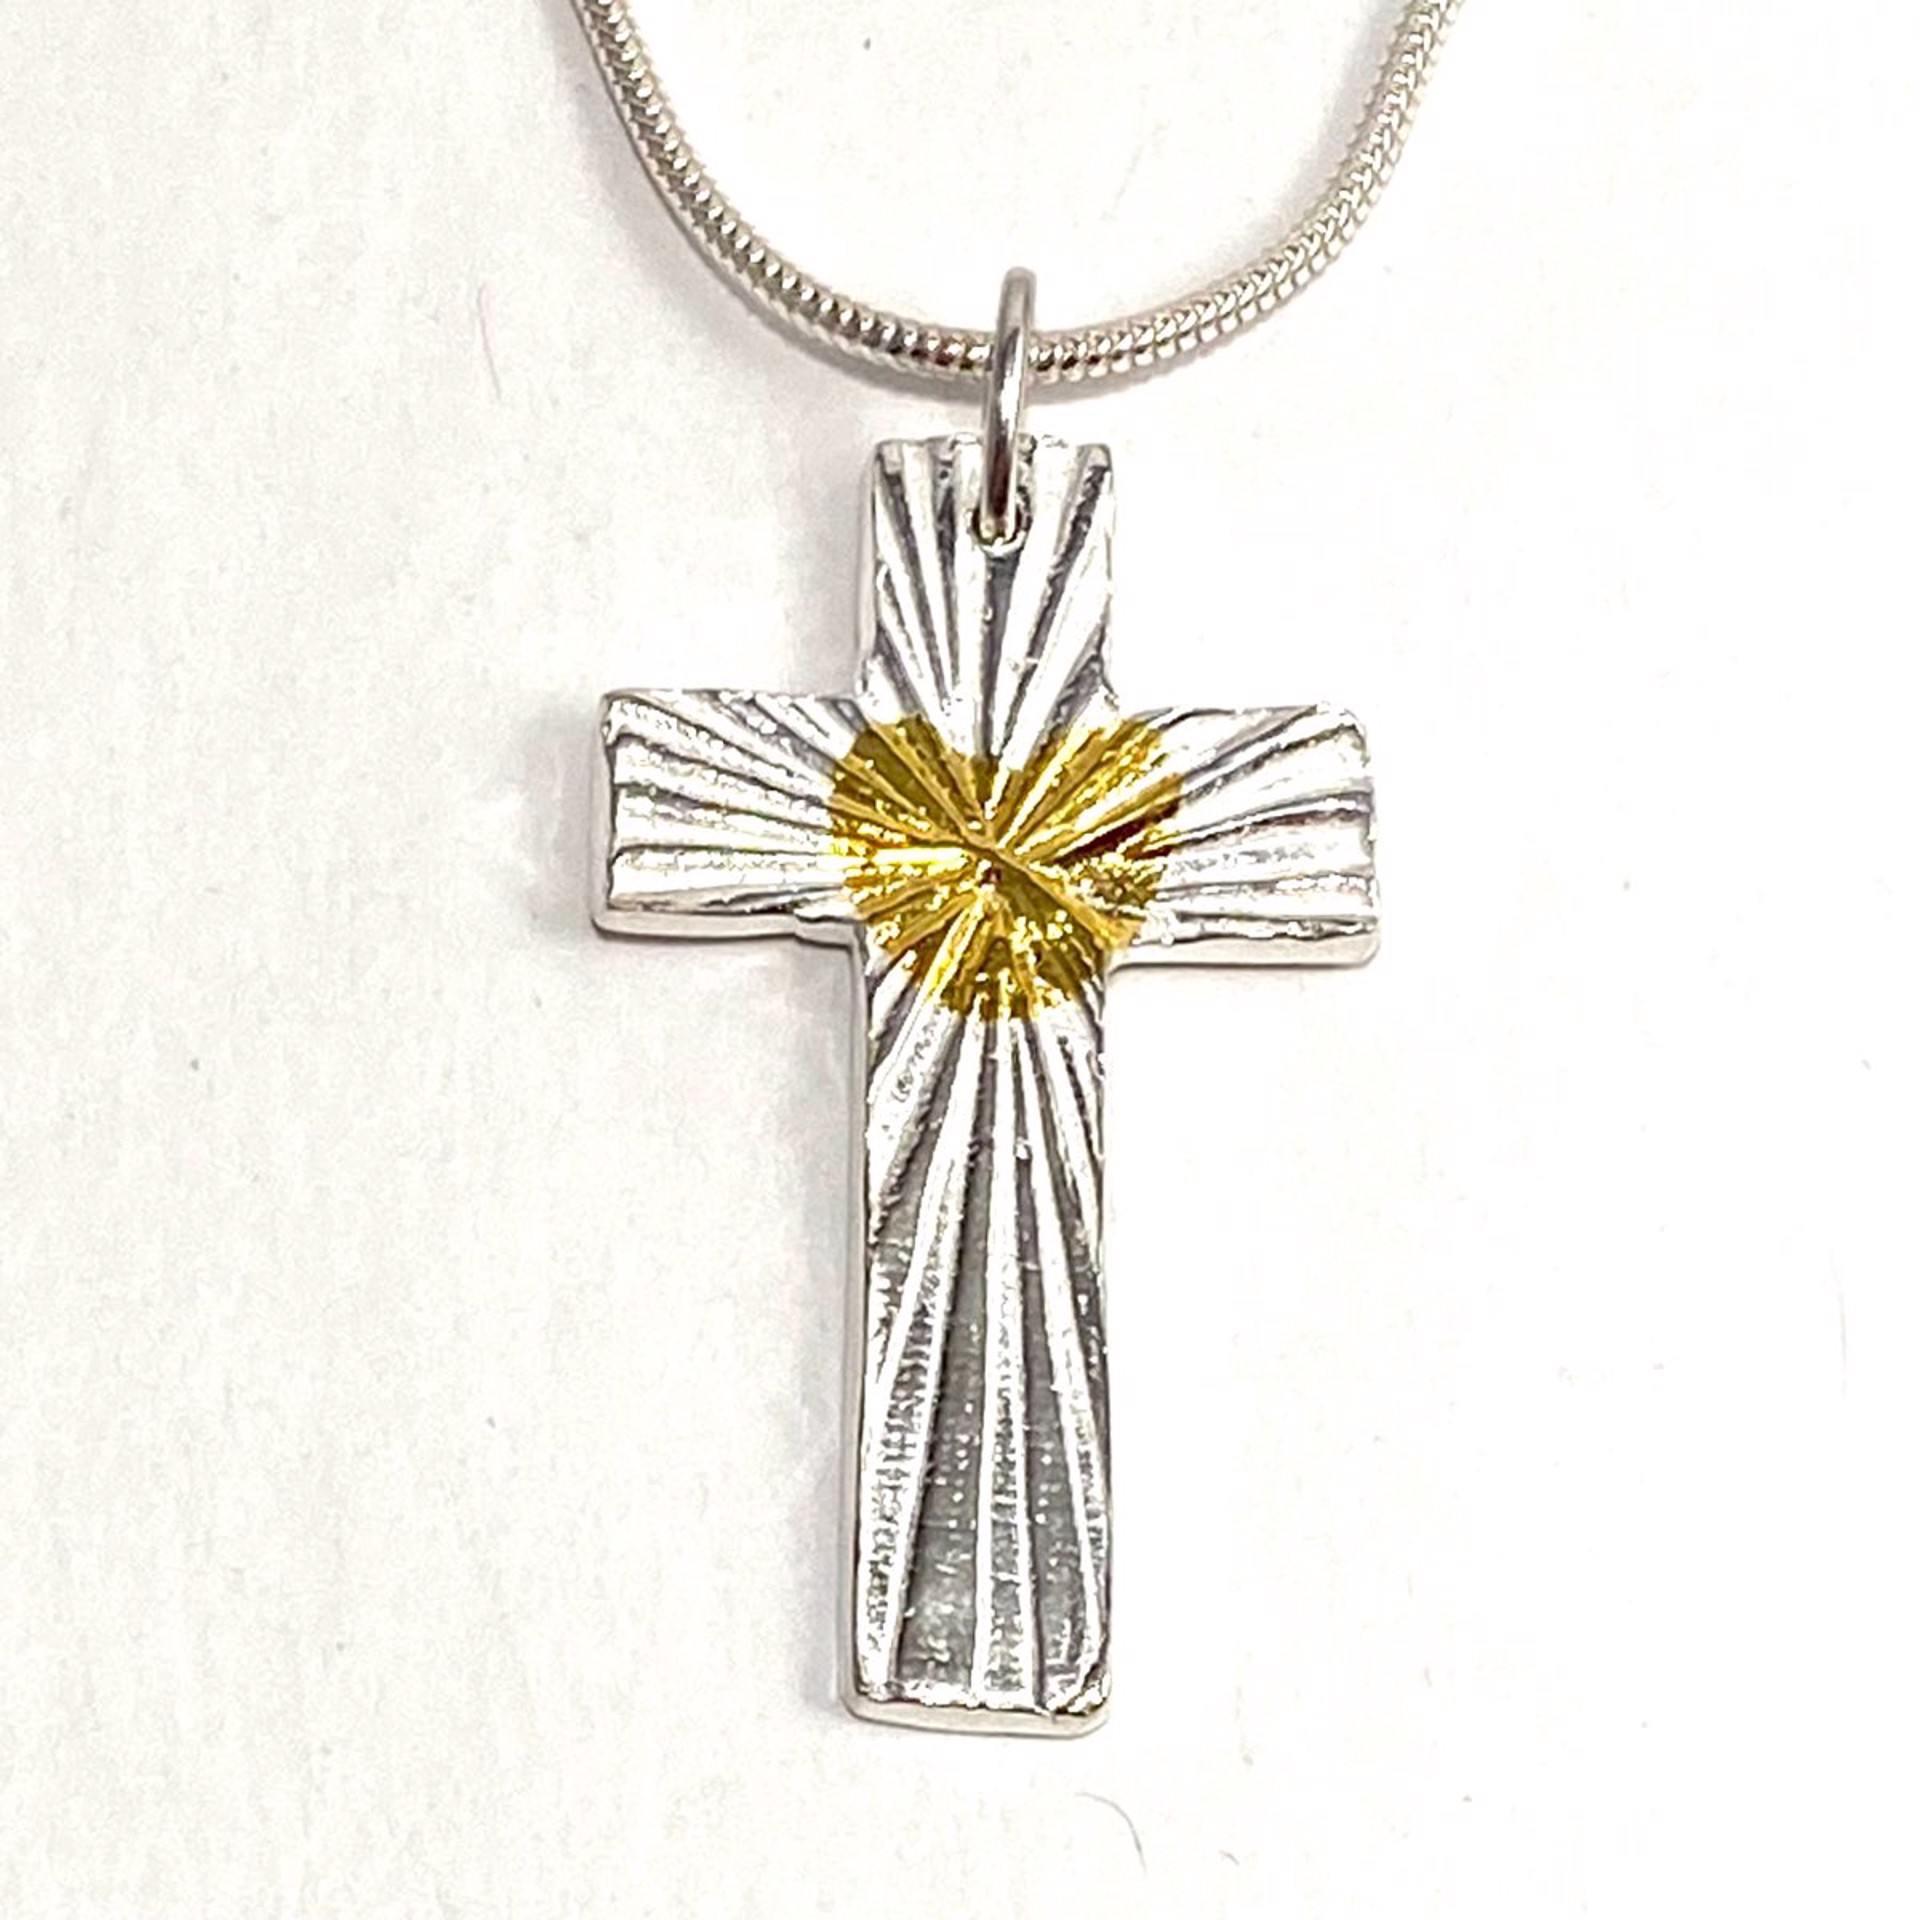 Keum-Boo Fine Silver and Gold Reversible Cross Necklace KH22-69 by Karen Hakim